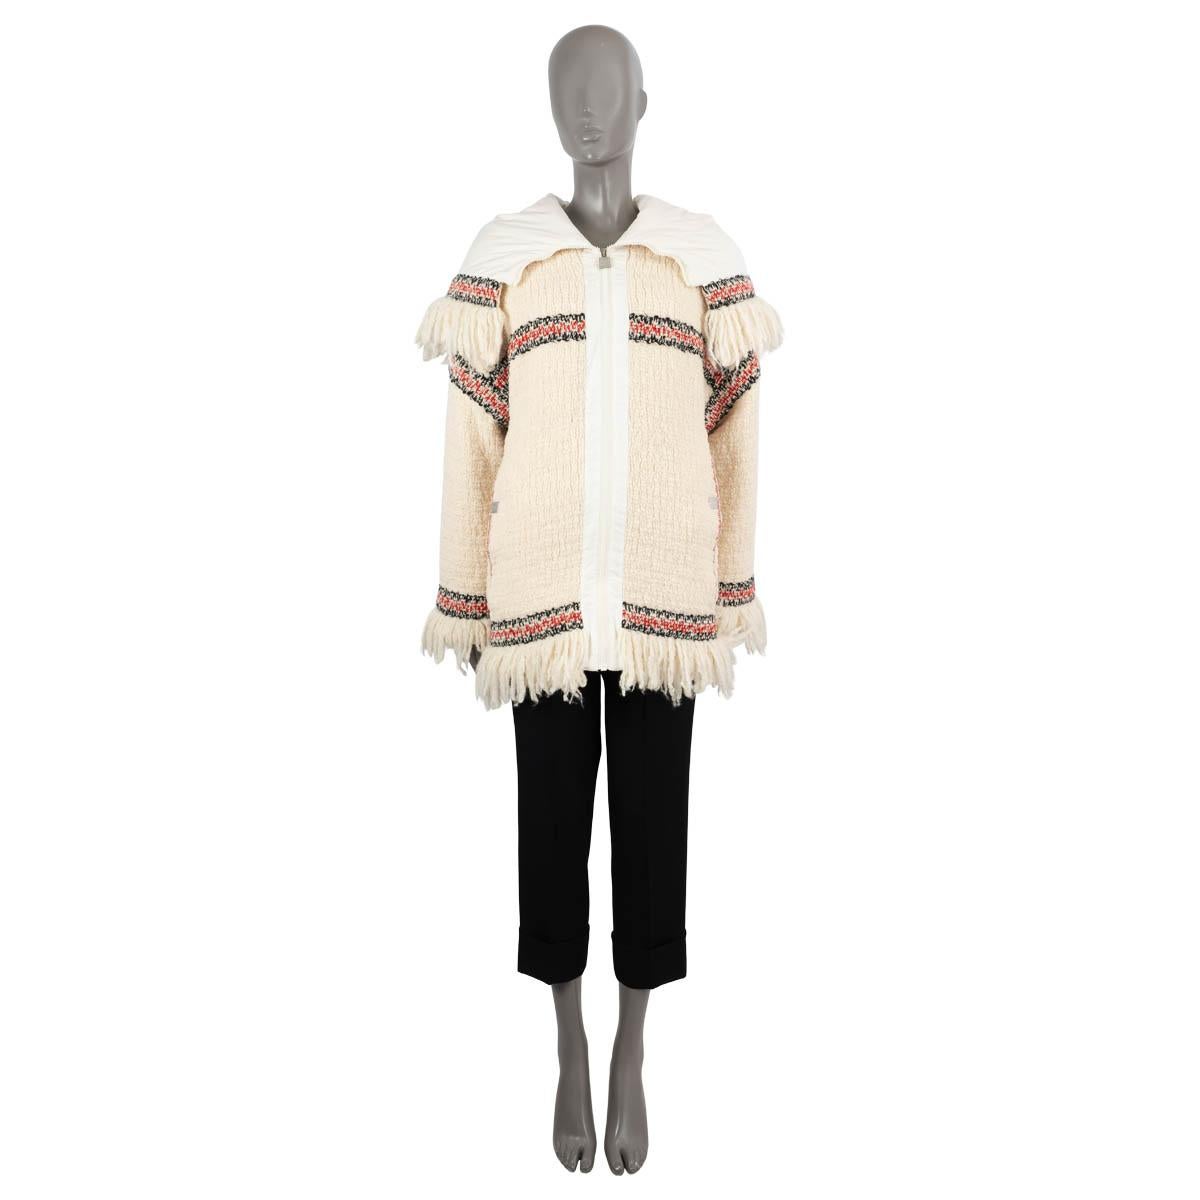 100% authentic Chanel 2008 fringed puffer jacket in ivory tweed wool (100%) and lined in white polyester (100%). The design features a big fringed hood, drop shoulders and two buttoned slit pockets on the side. Has been worn and shows some soft wear